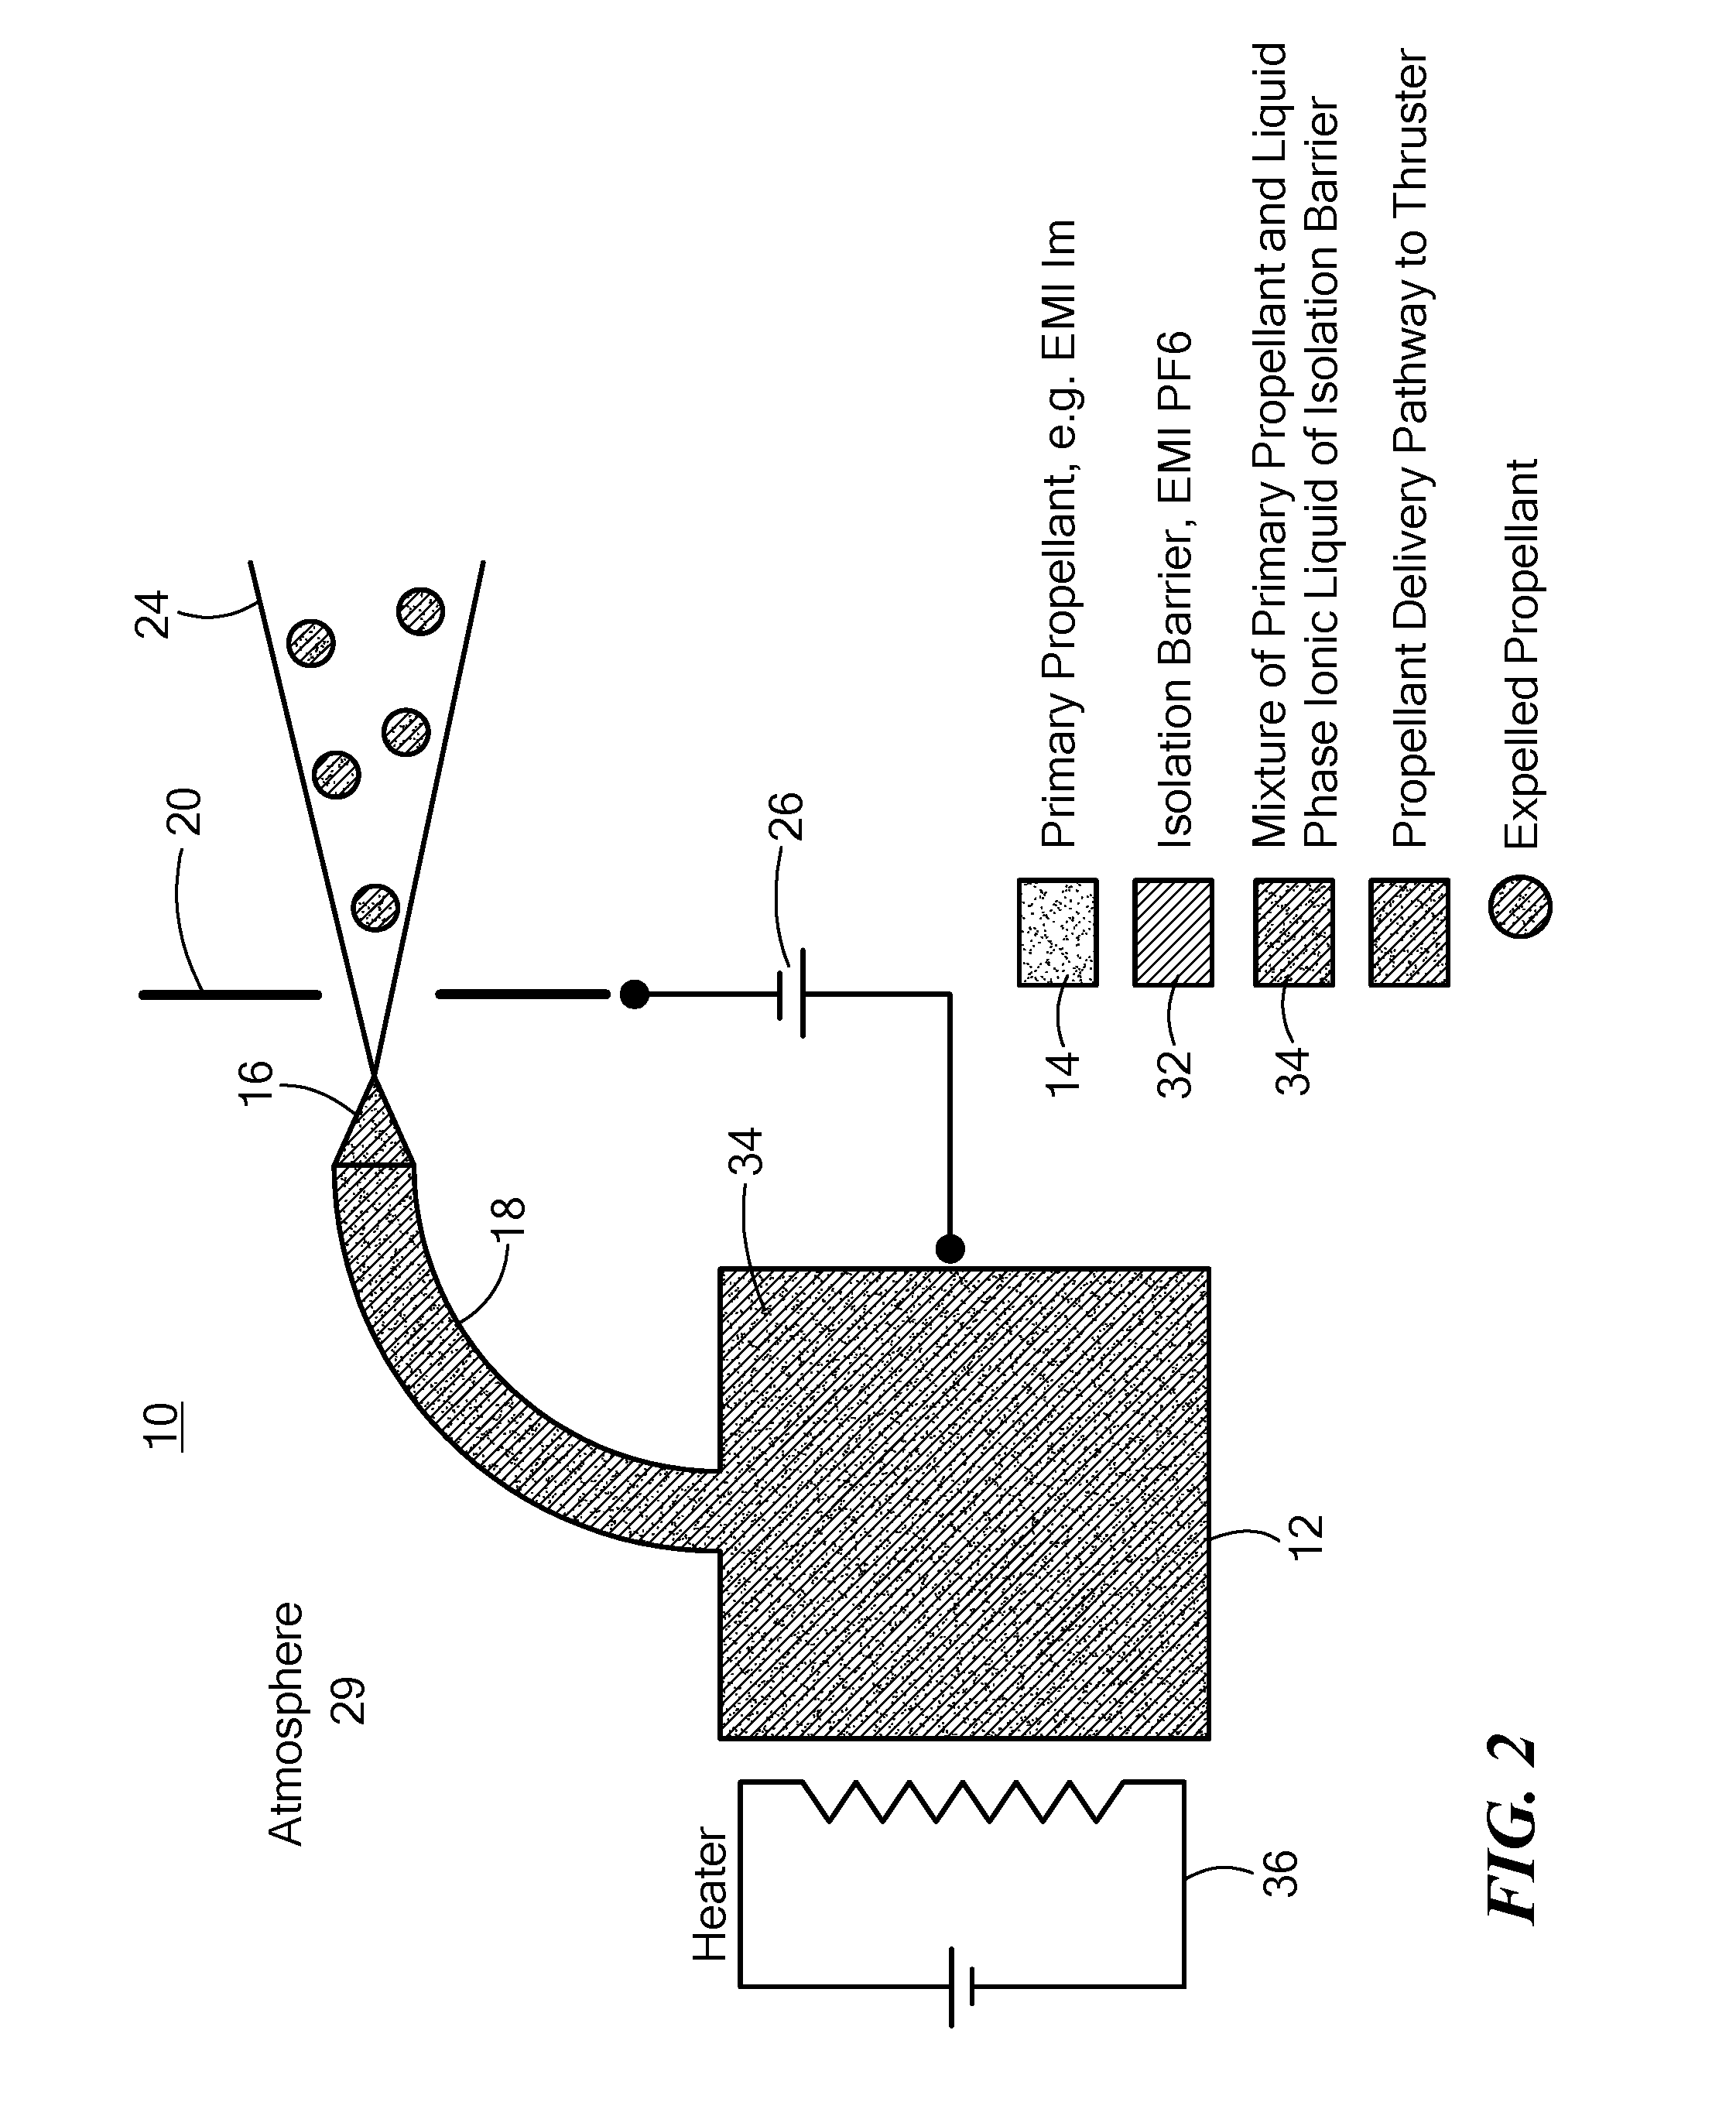 Propellant isolation barrier